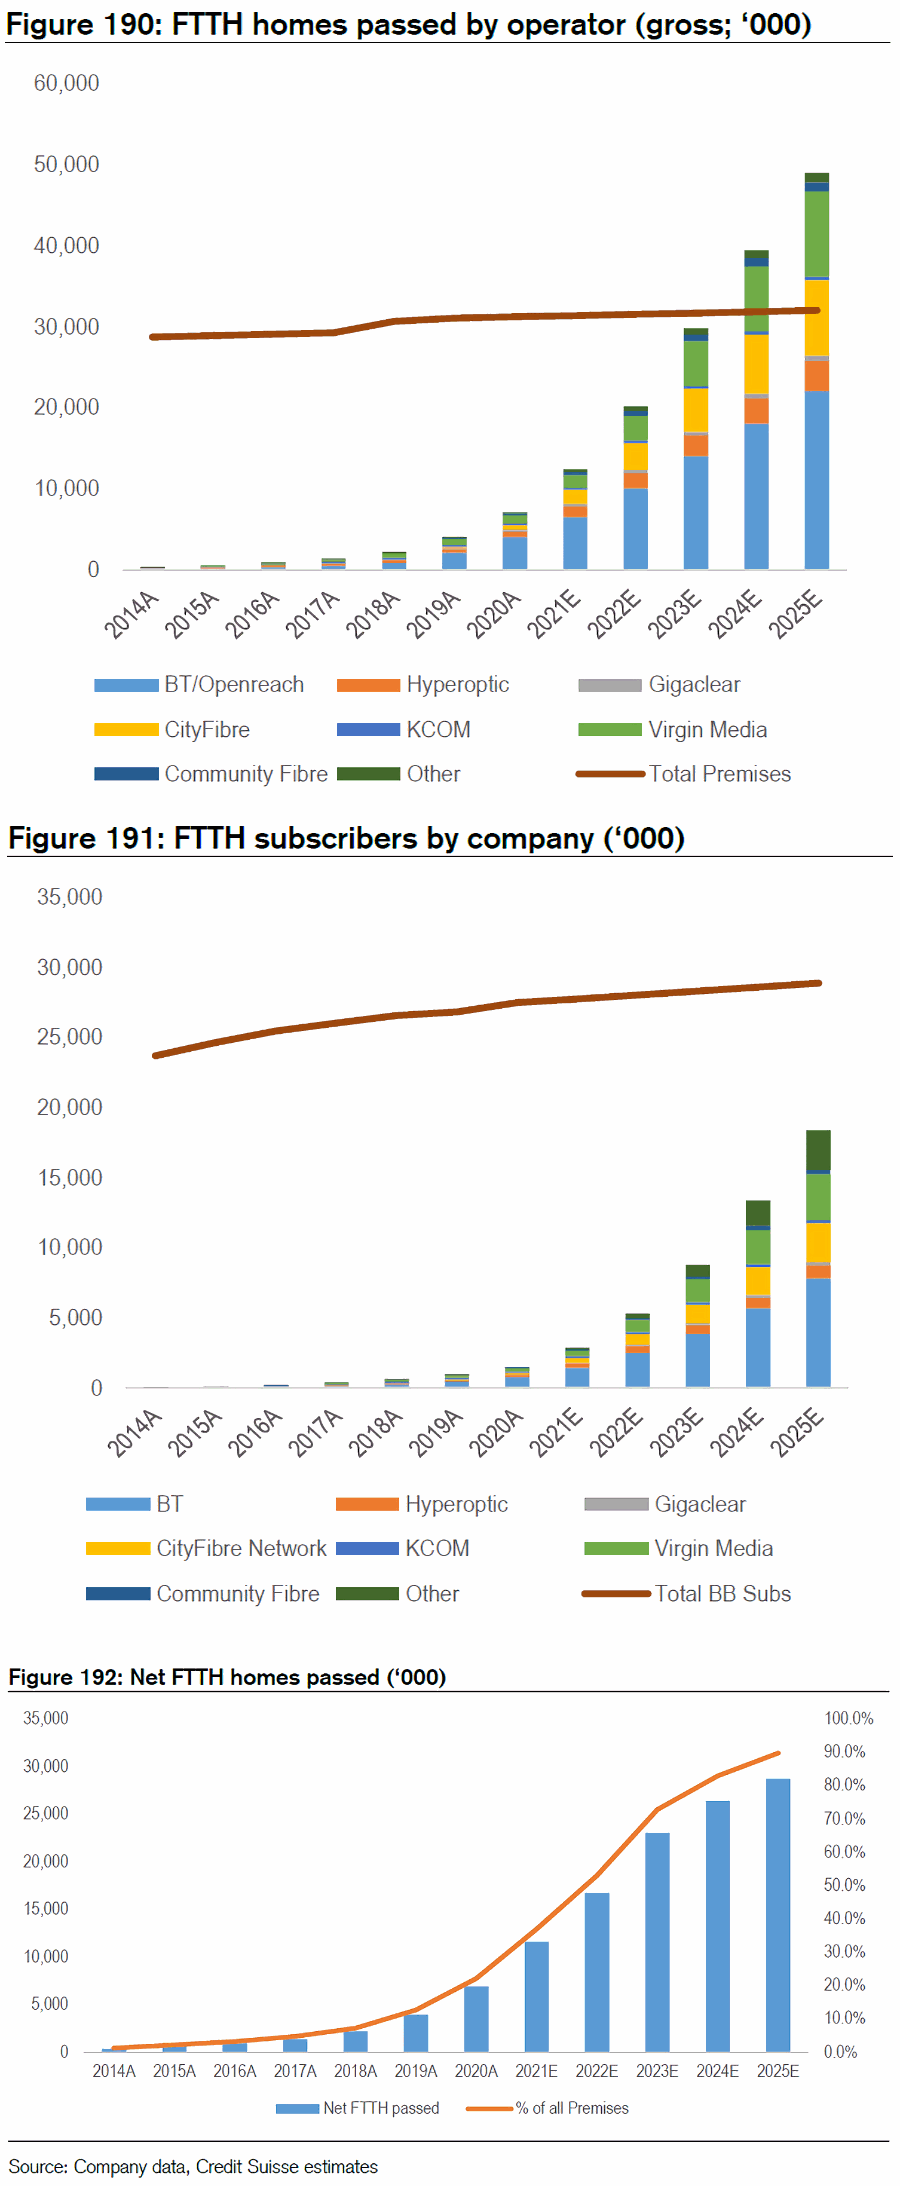 Credit Suisse FTTH Predictions for UK 2025